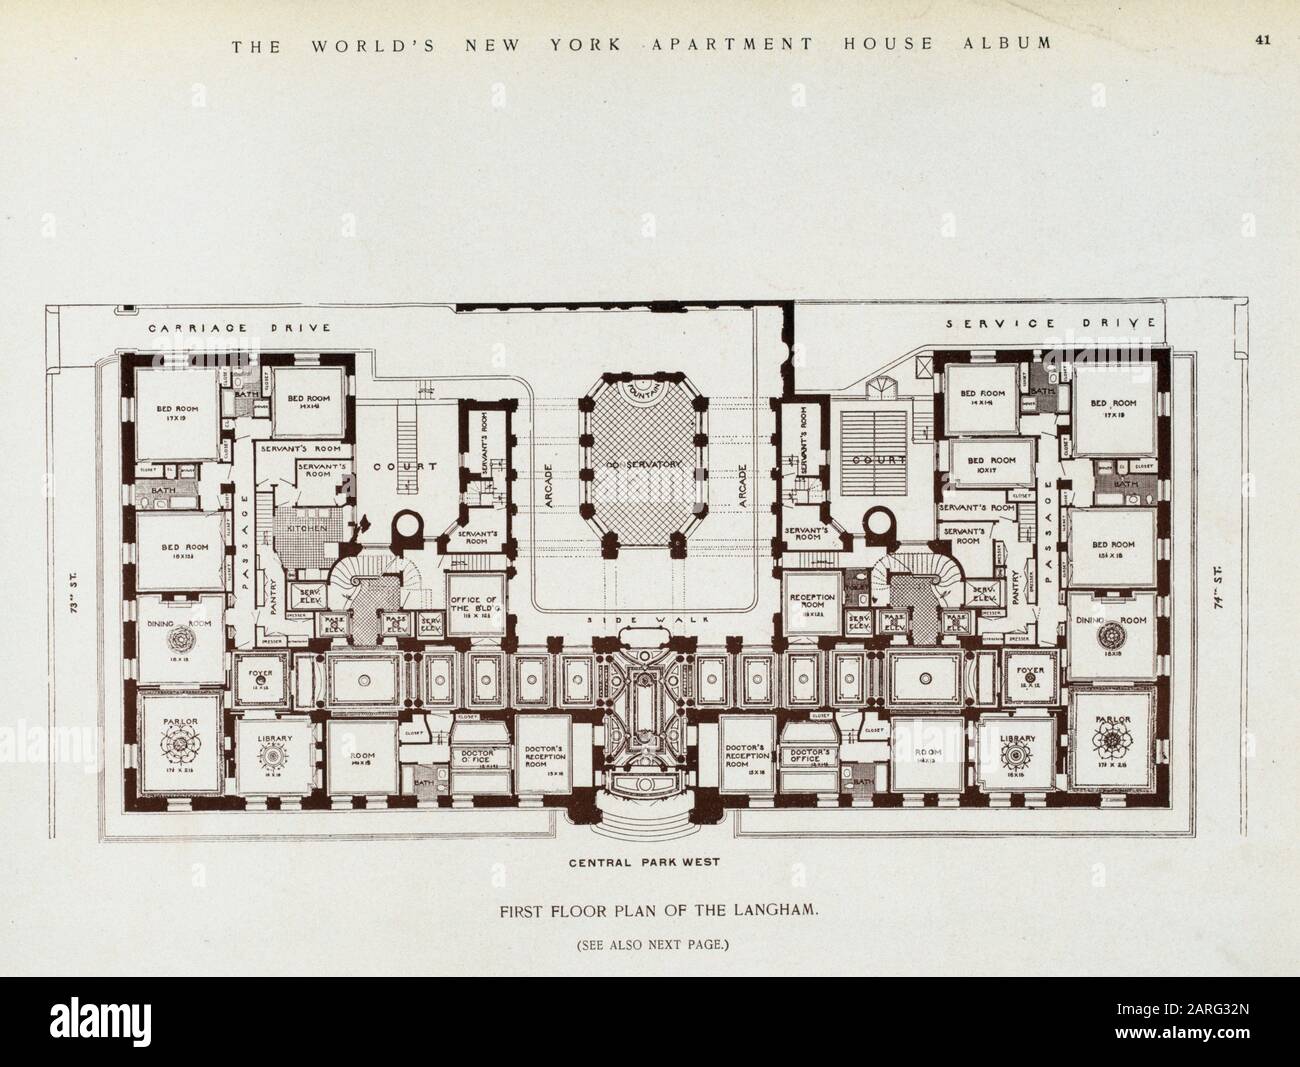 First Floor Plan Of The Langham The World S Loose Leaf Album Of